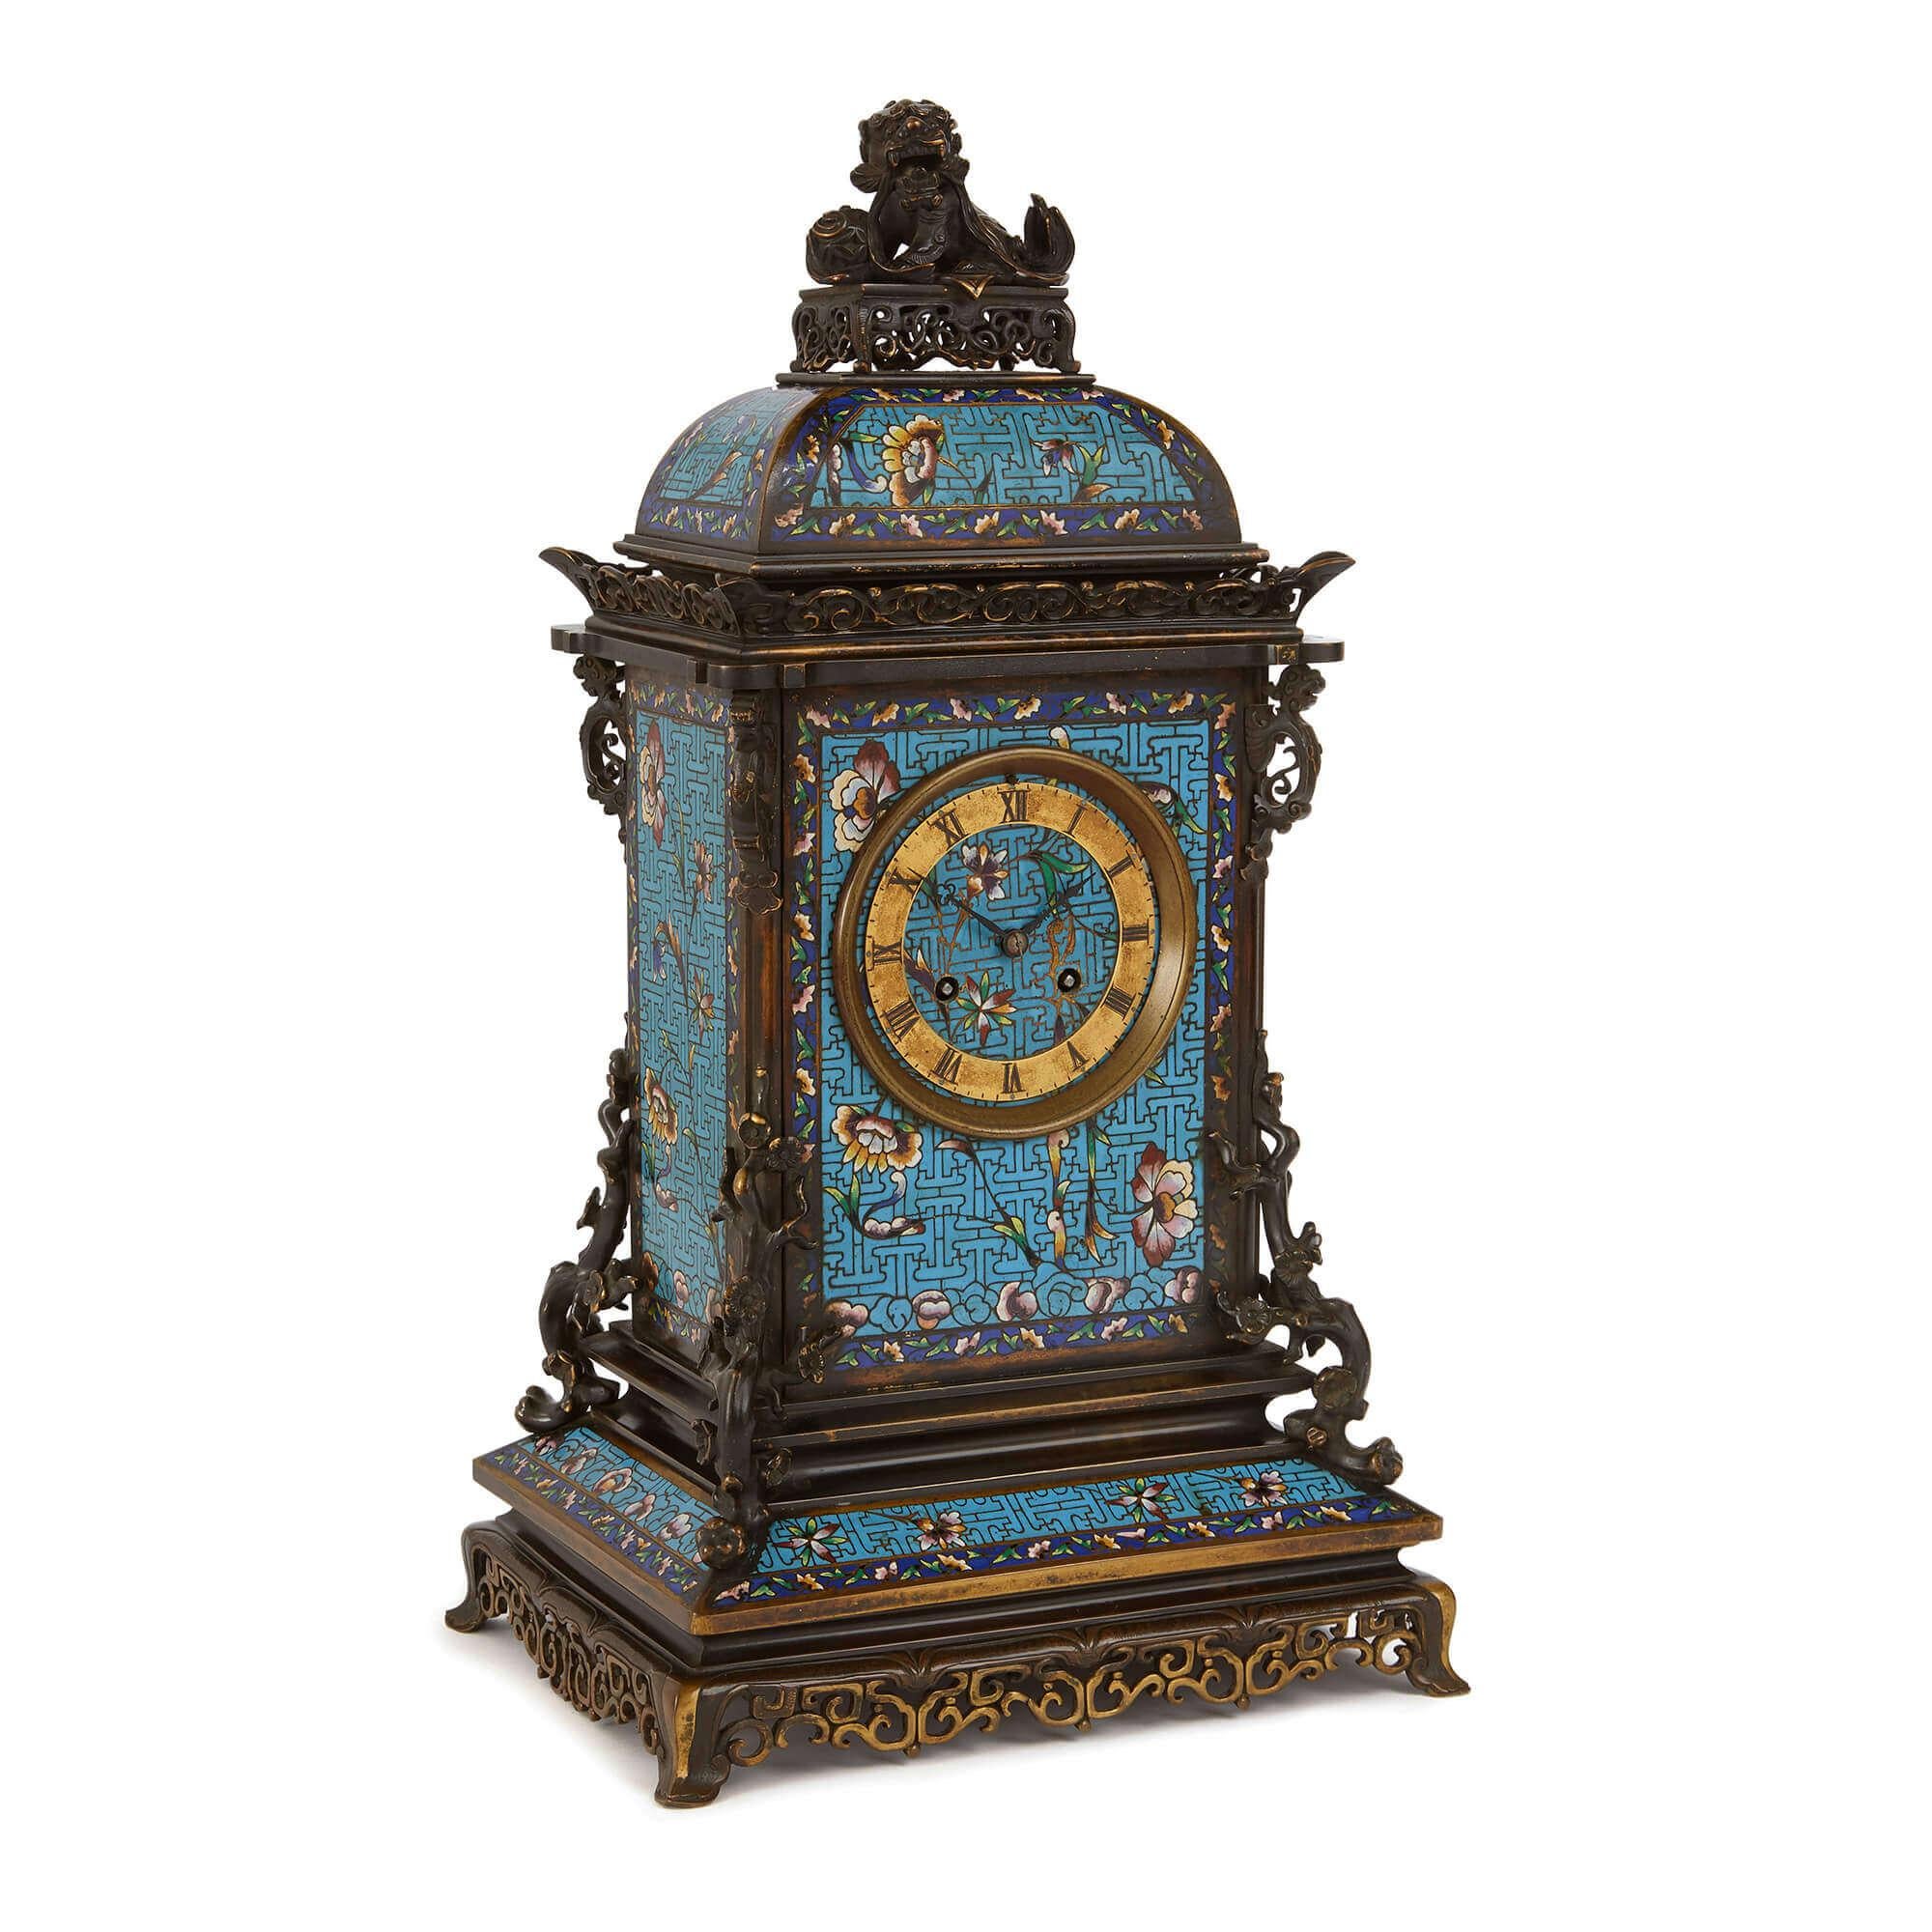 Antique French Japonisme mantel clock with floral Champlevé enamel
French, late 19th century
Dimensions: Height 51cm, width 27.5cm, depth 22cm

Beautifully wrought from patinated bronze and champlevé enamel, this mantel clock is designed in the